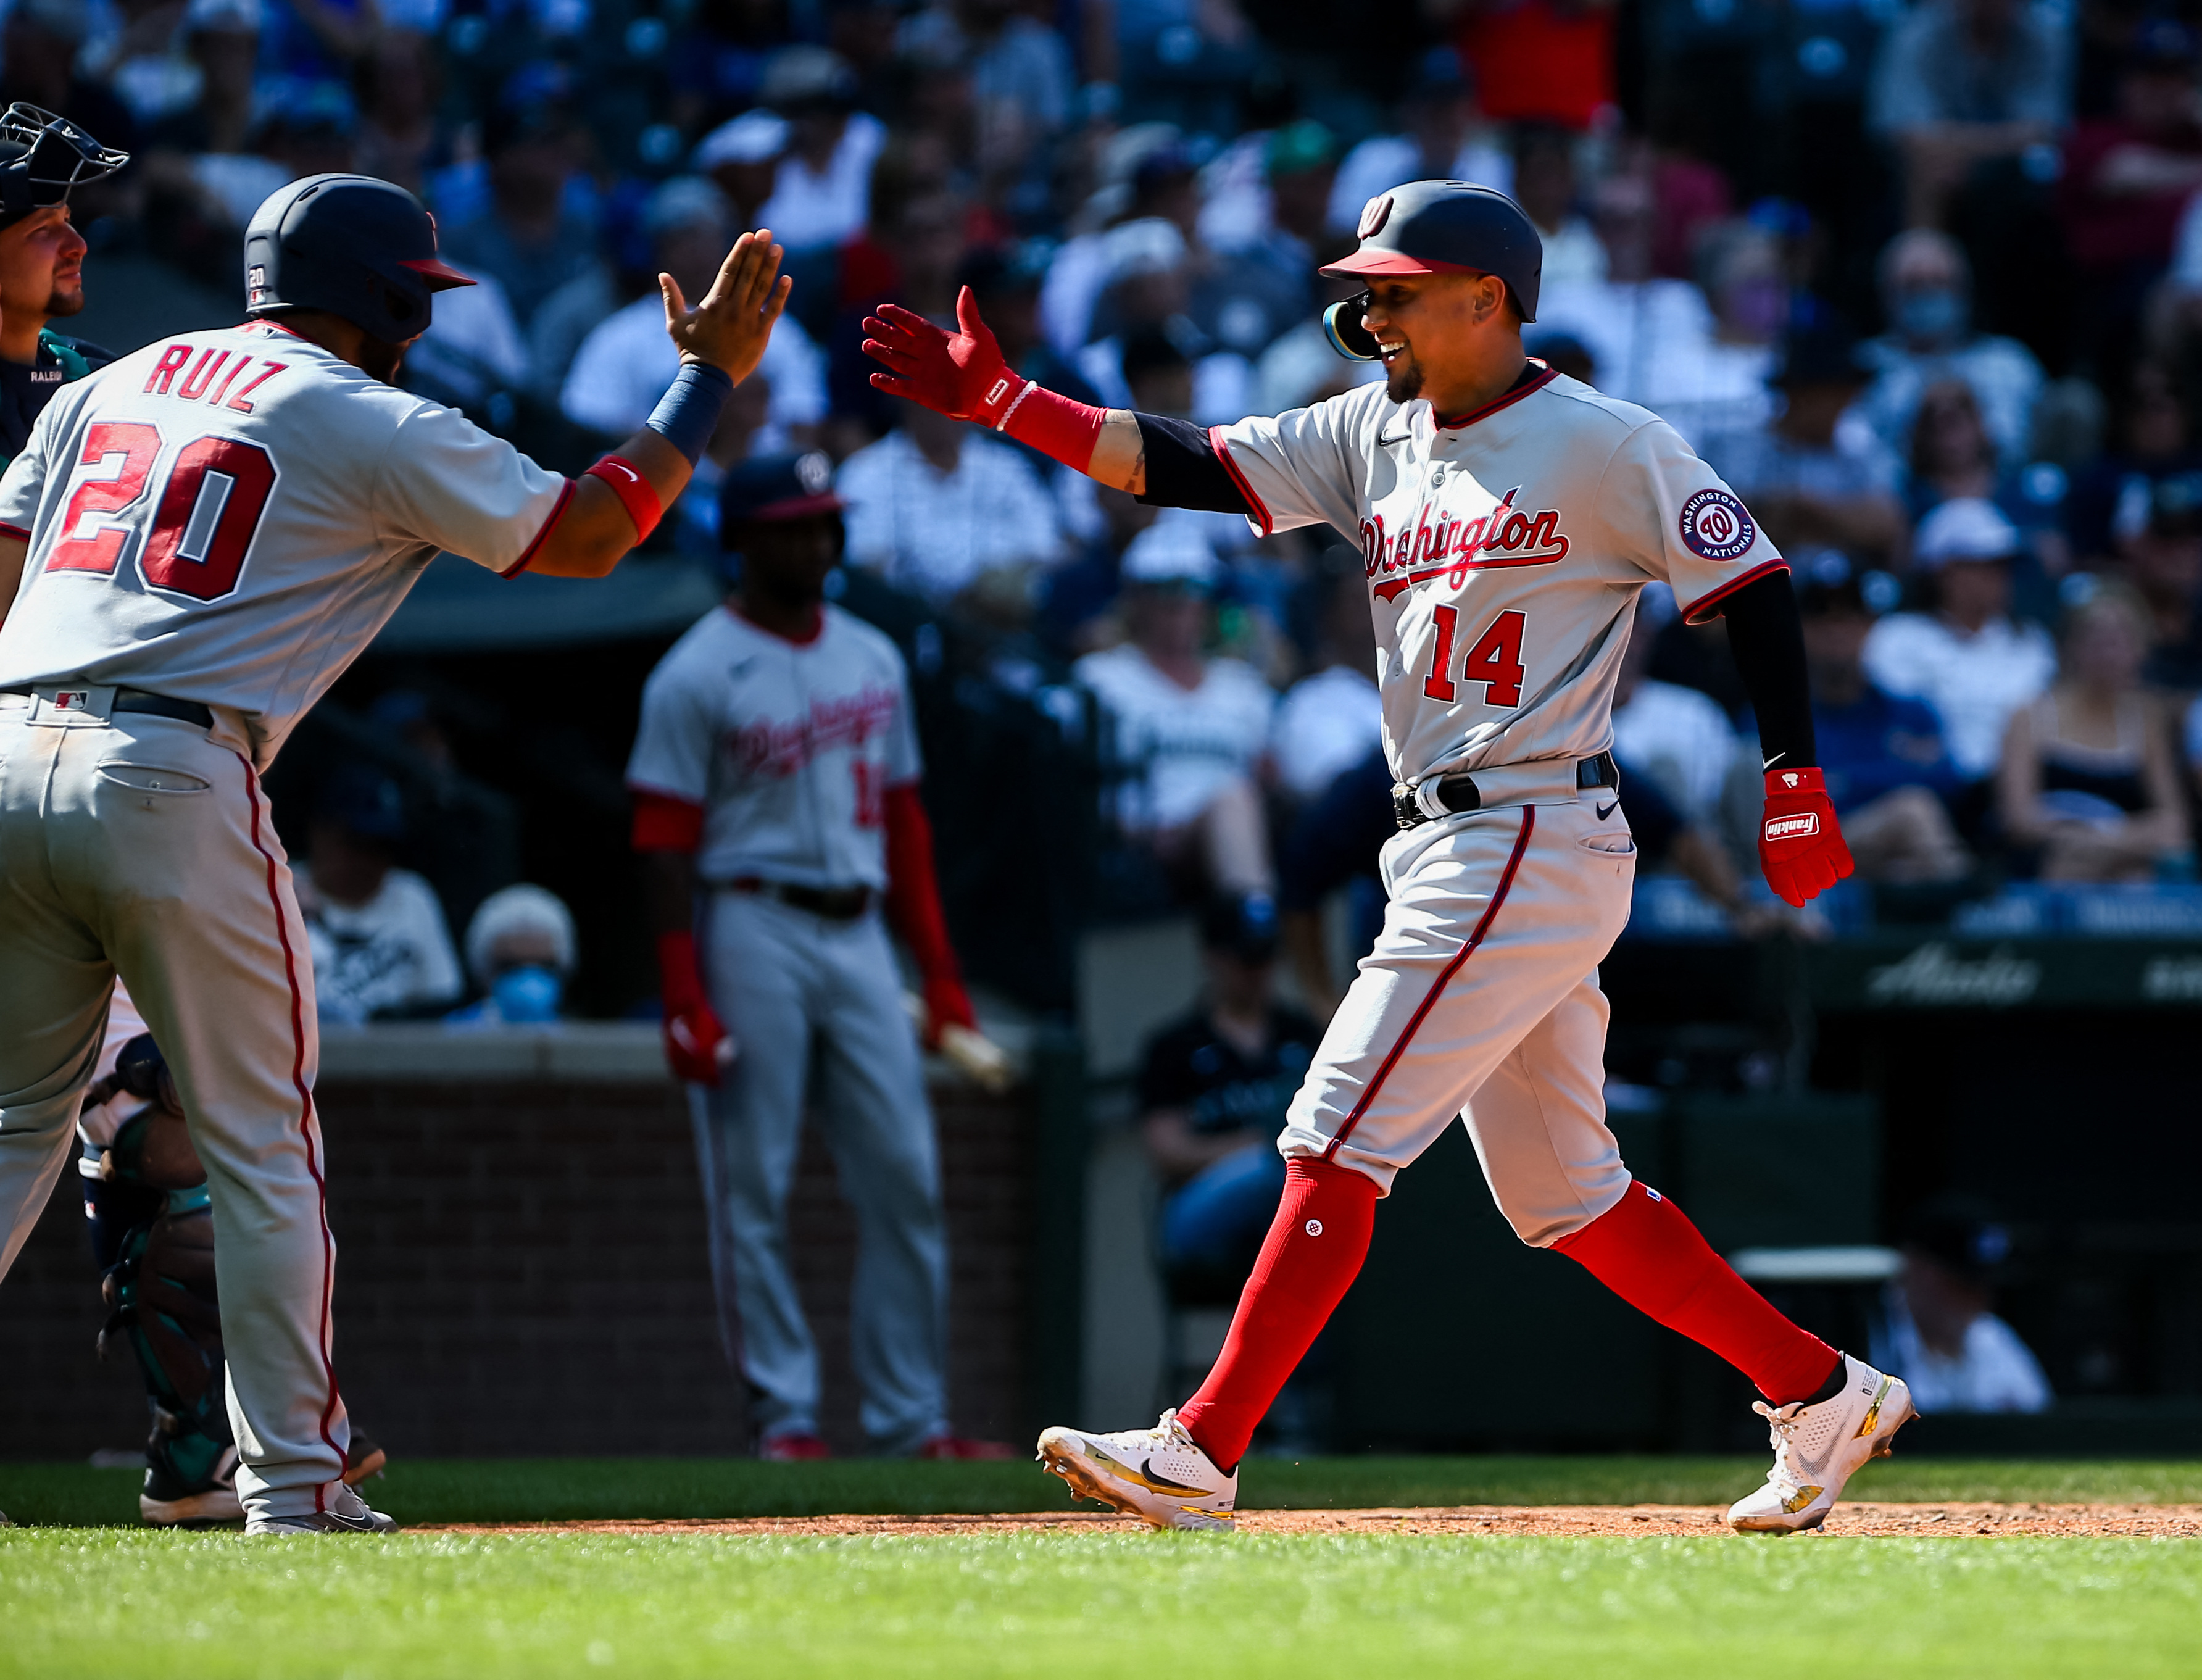 Oscar Gonzalez overcomes miscue for big hit in Cleveland win